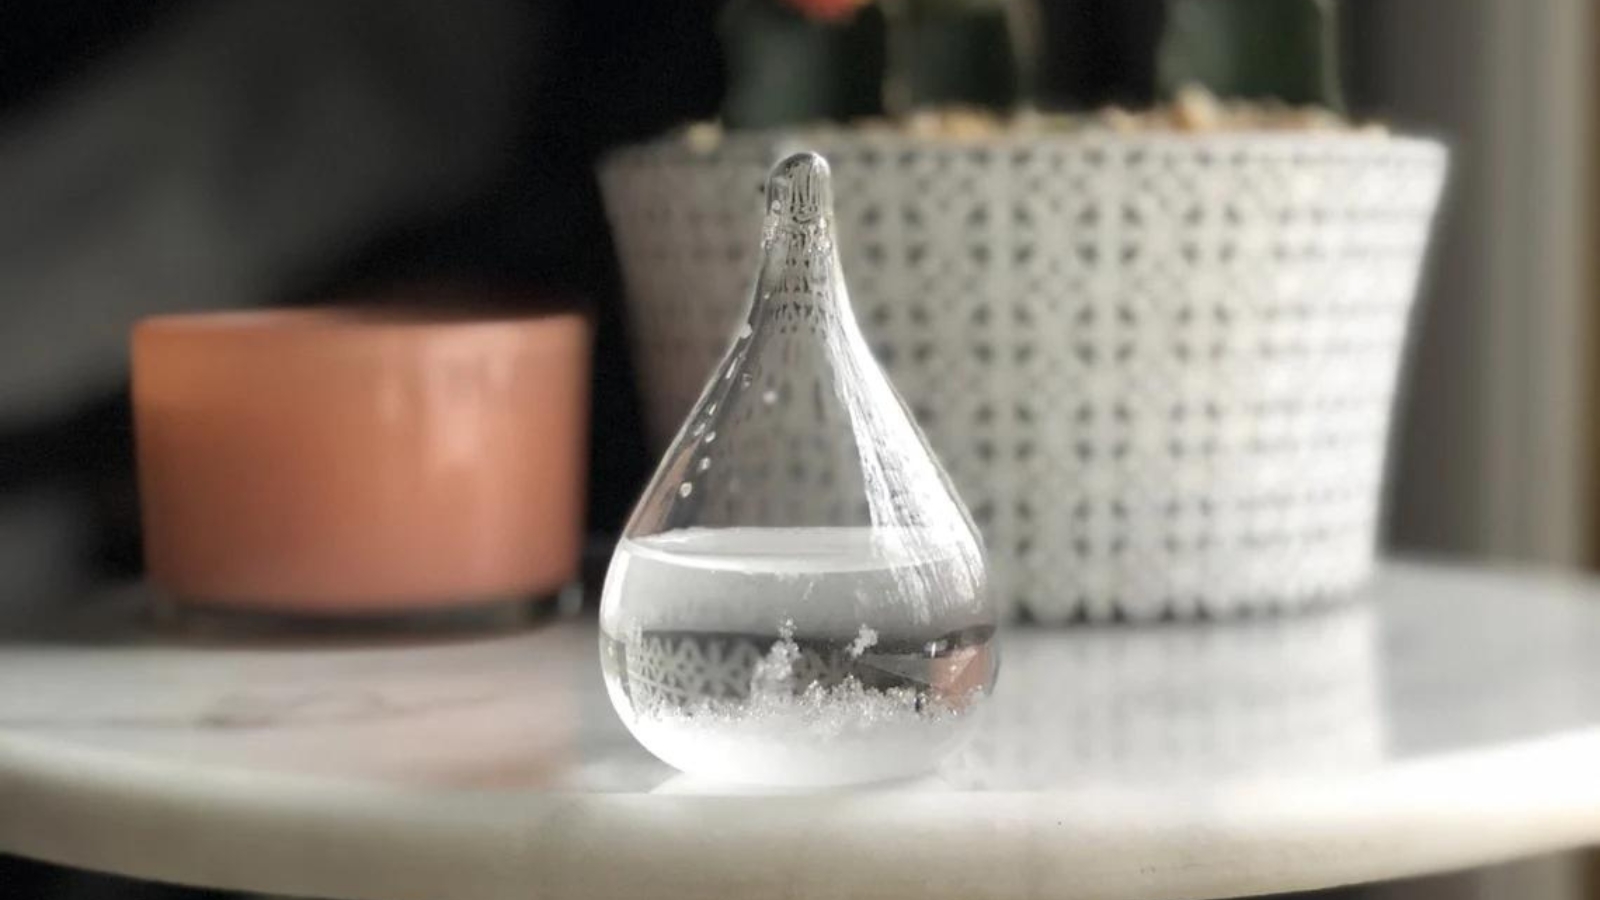 storm glass in the shape of a tear drop that holds a liquid that changes according to weather conditions